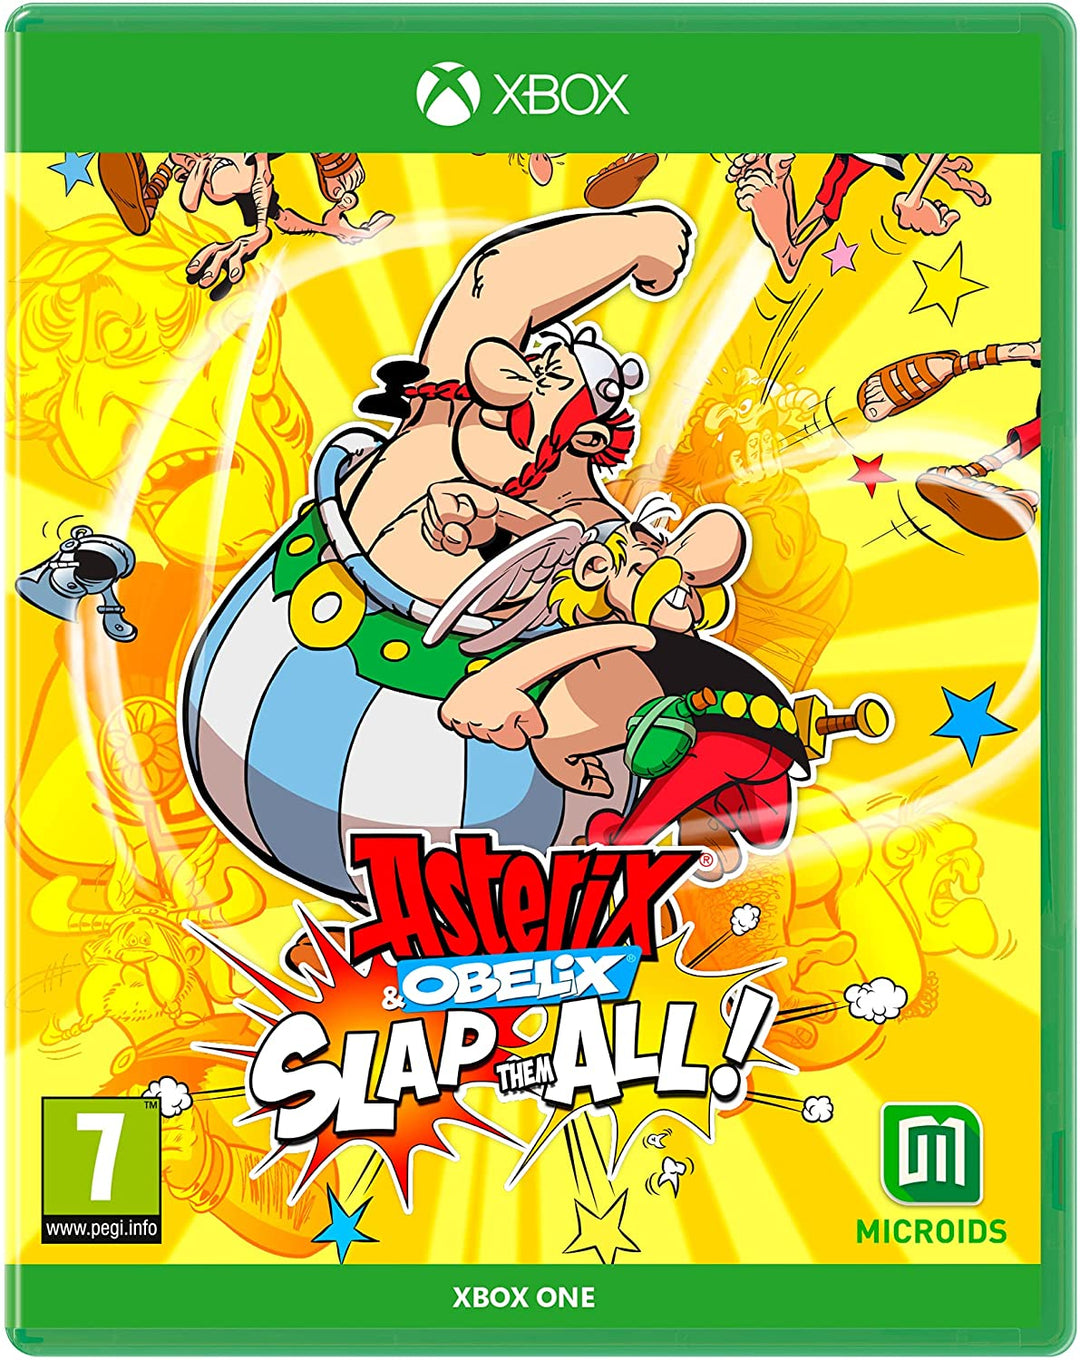 Asterix & Obelix: Slap Them All - Limited Edition (Xbox One)